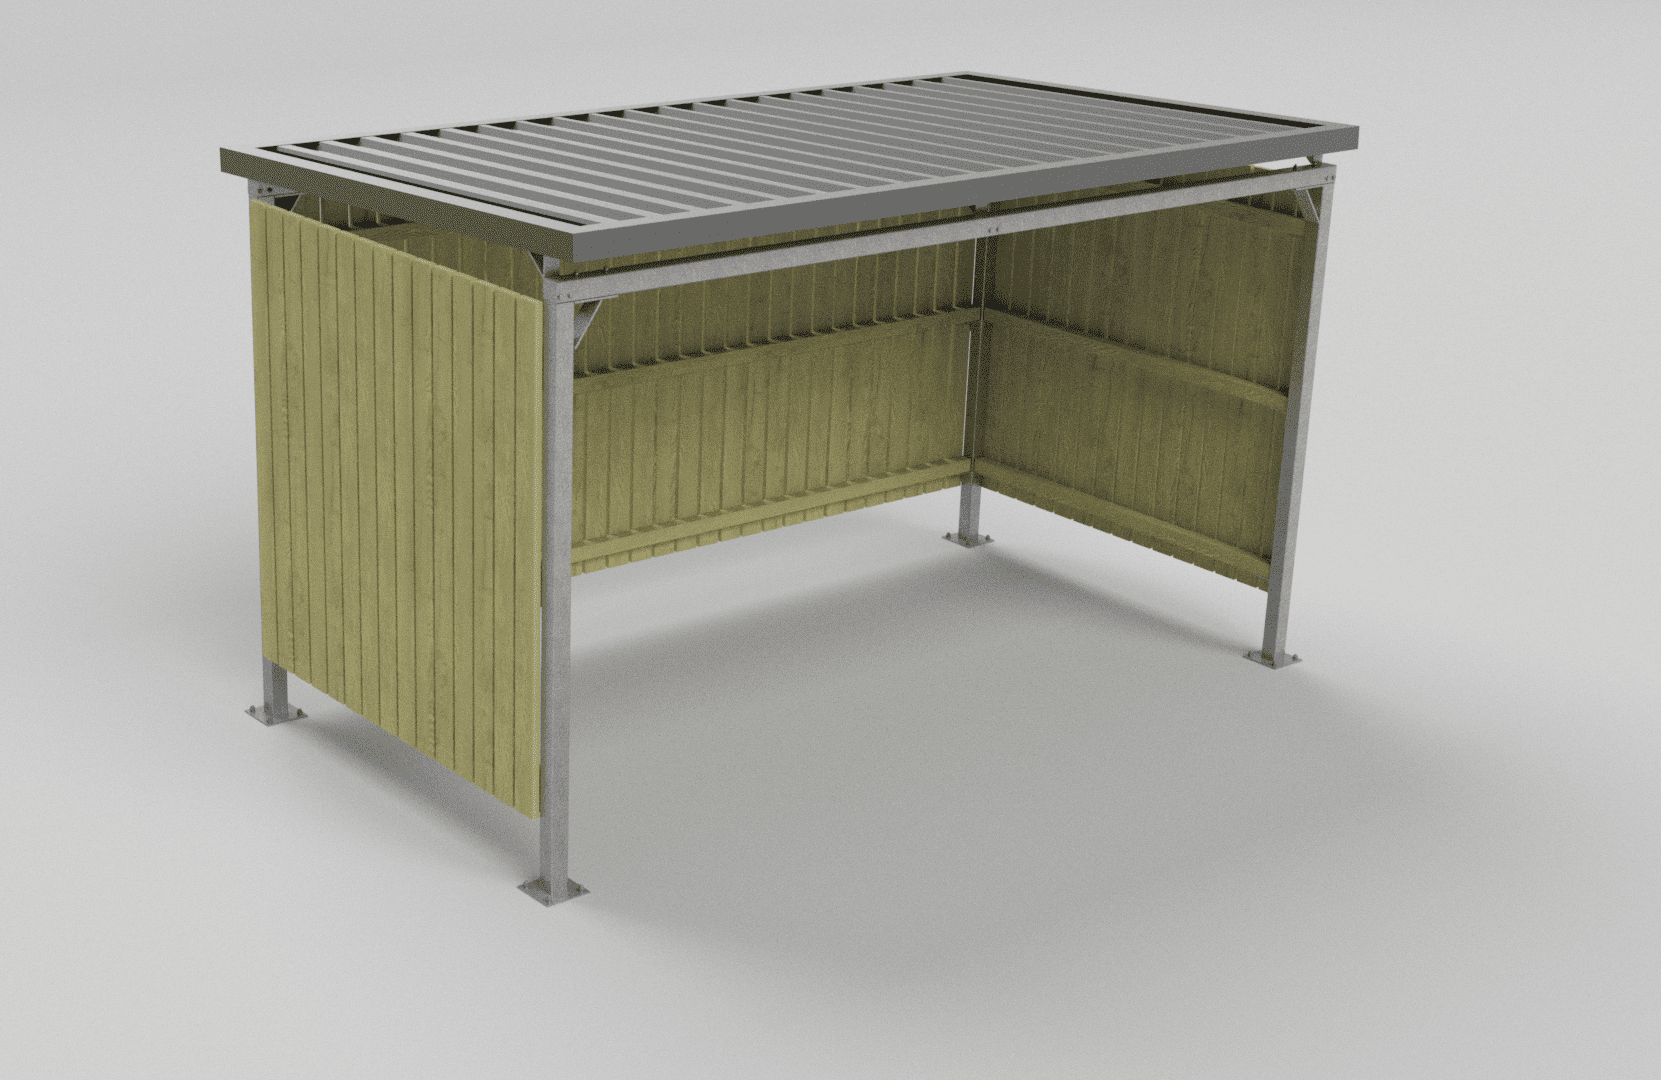 Malford Cycle Shelter MCS211